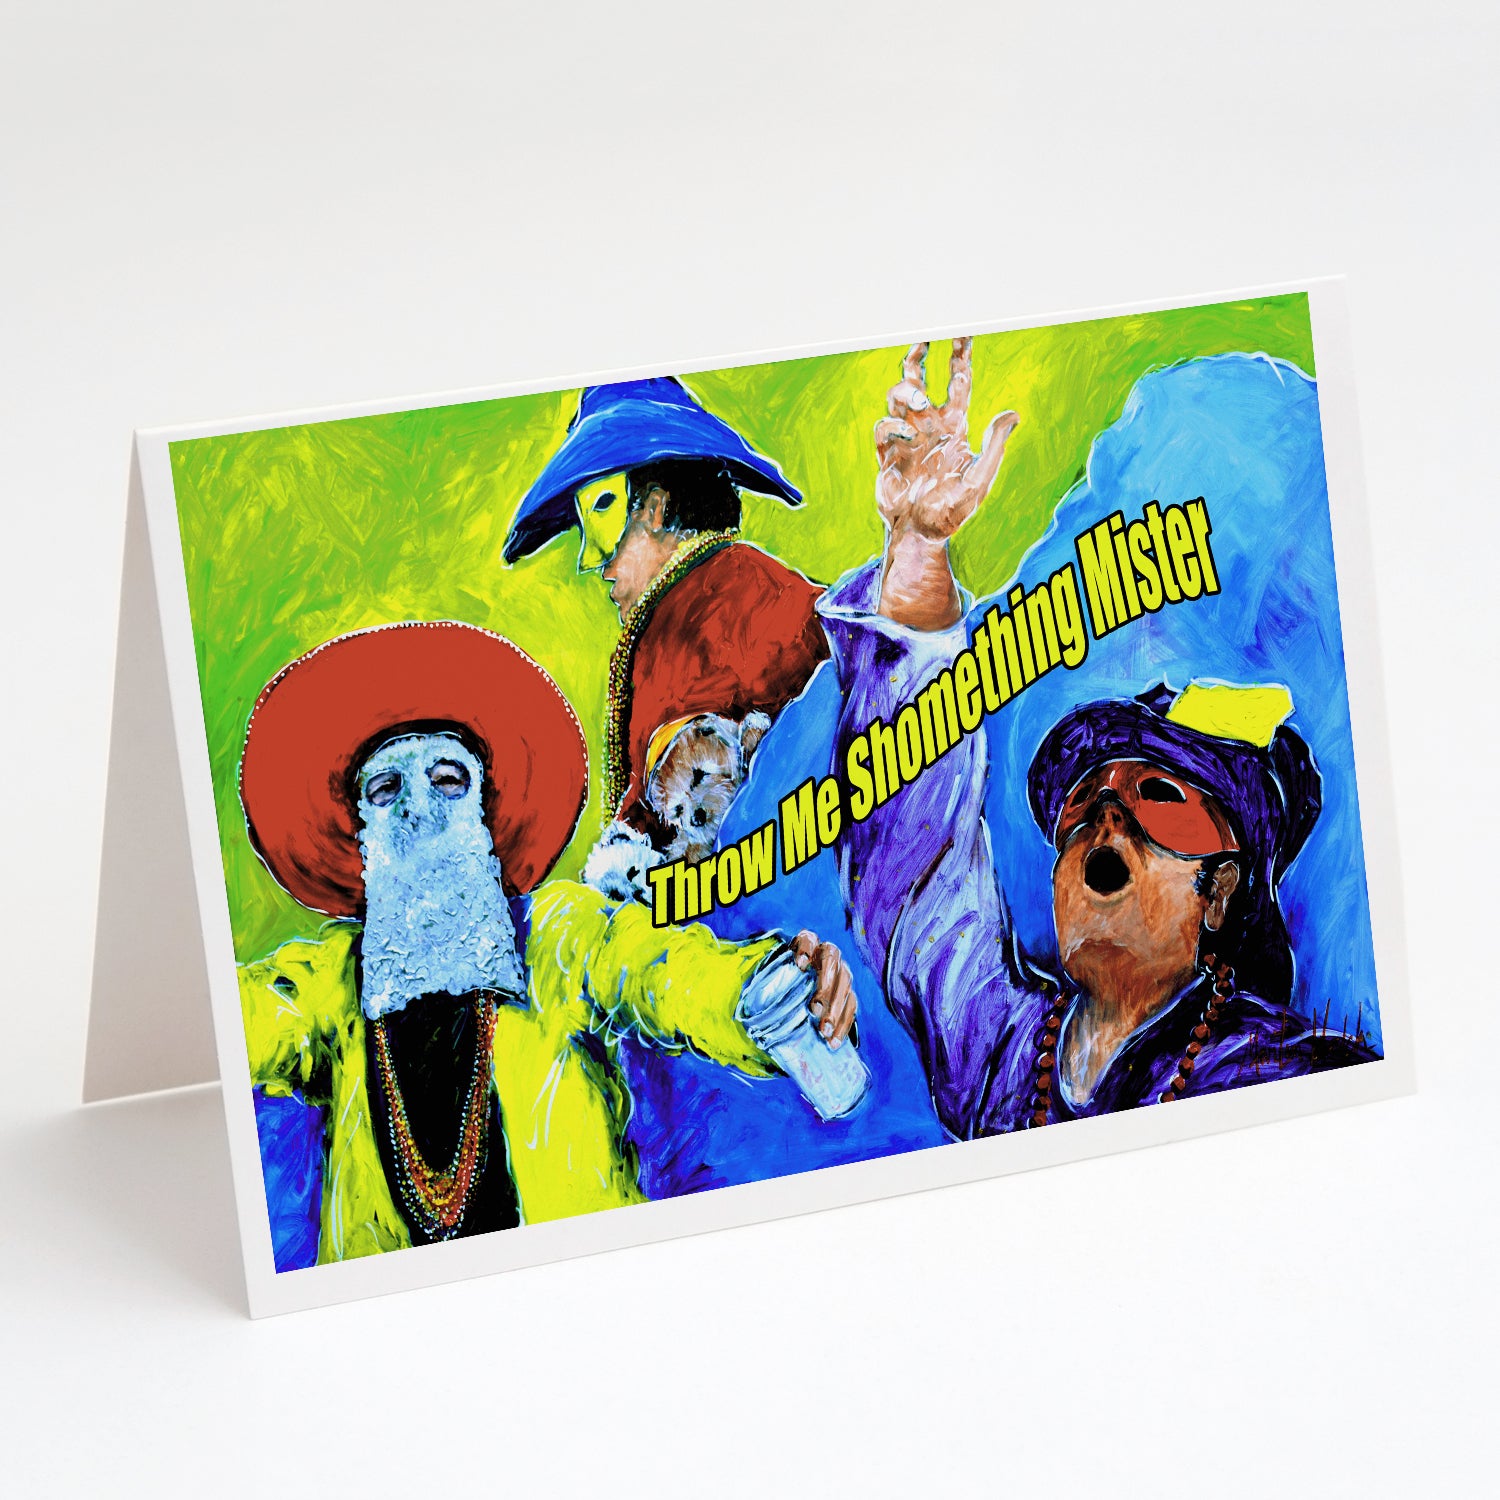 Buy this Mardi Gras Throw me something mister Greeting Cards Pack of 8